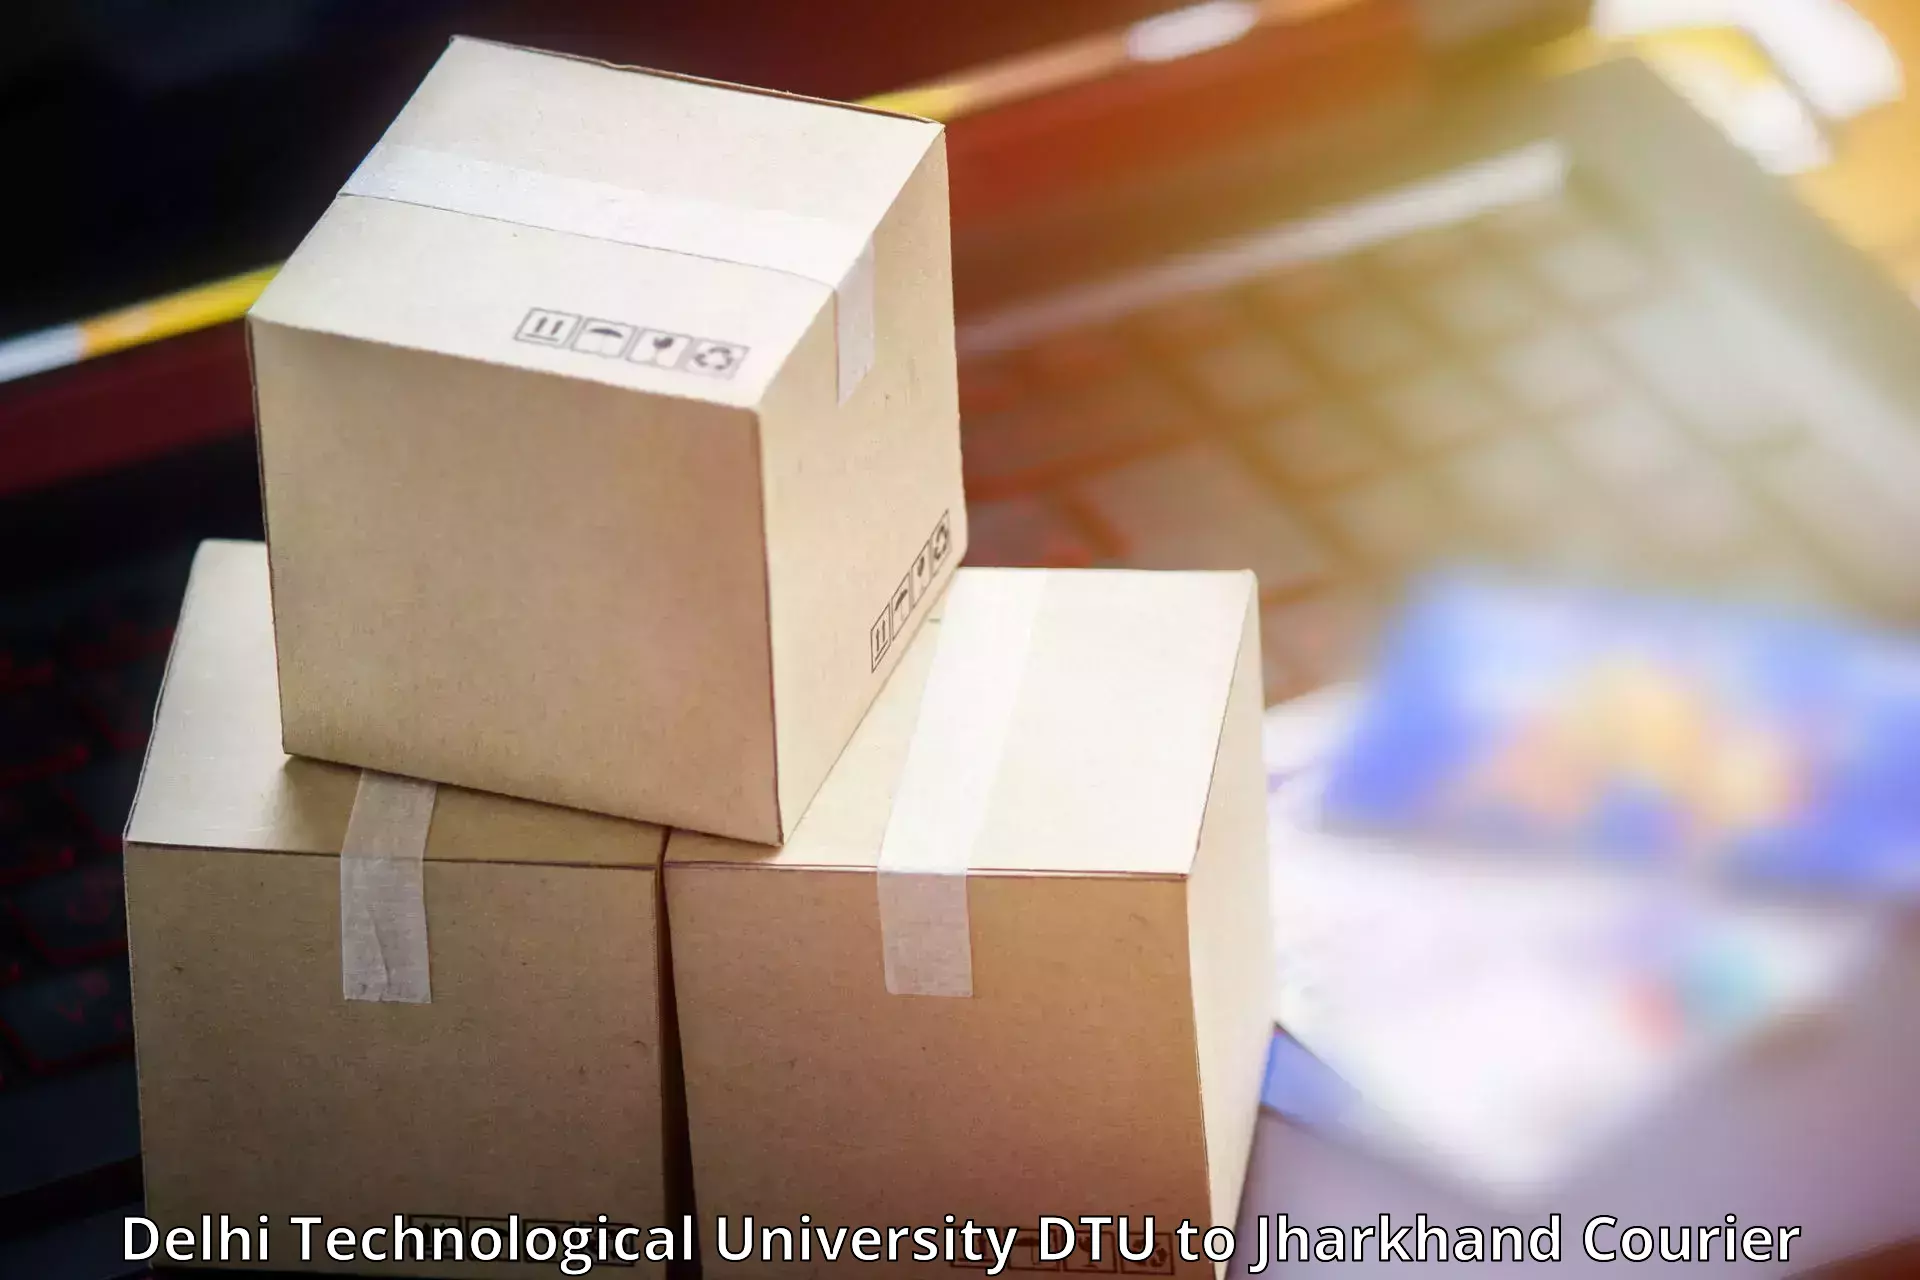 On-call courier service Delhi Technological University DTU to Nirsa